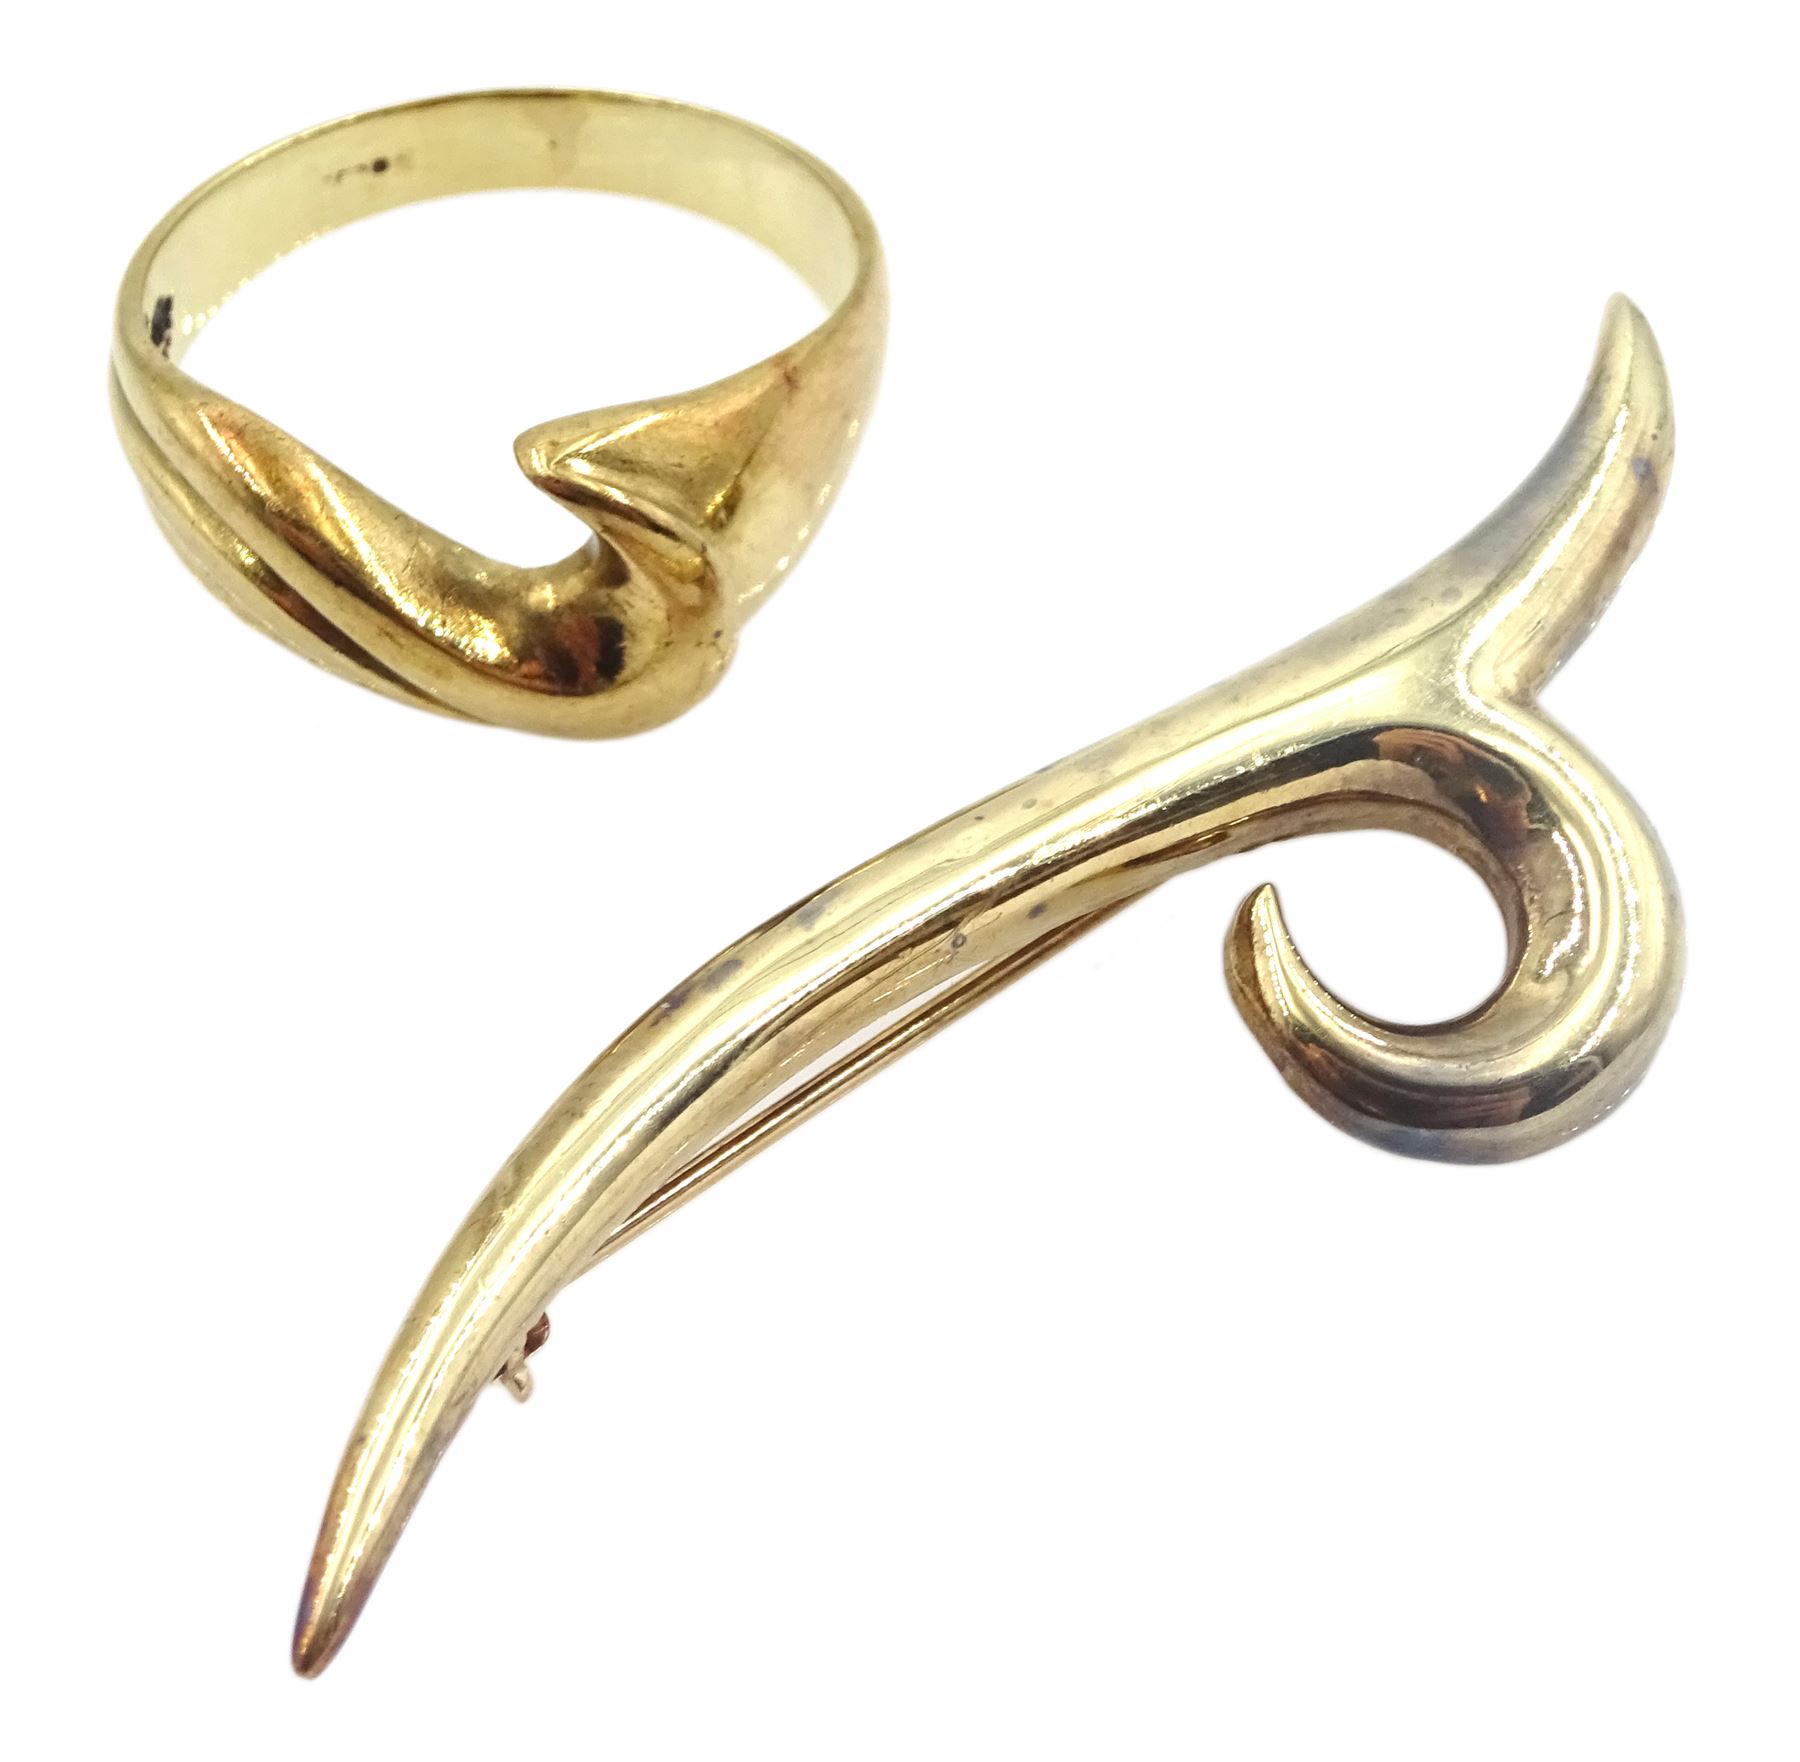 Gold swirl ring and a similar gold bar brooch